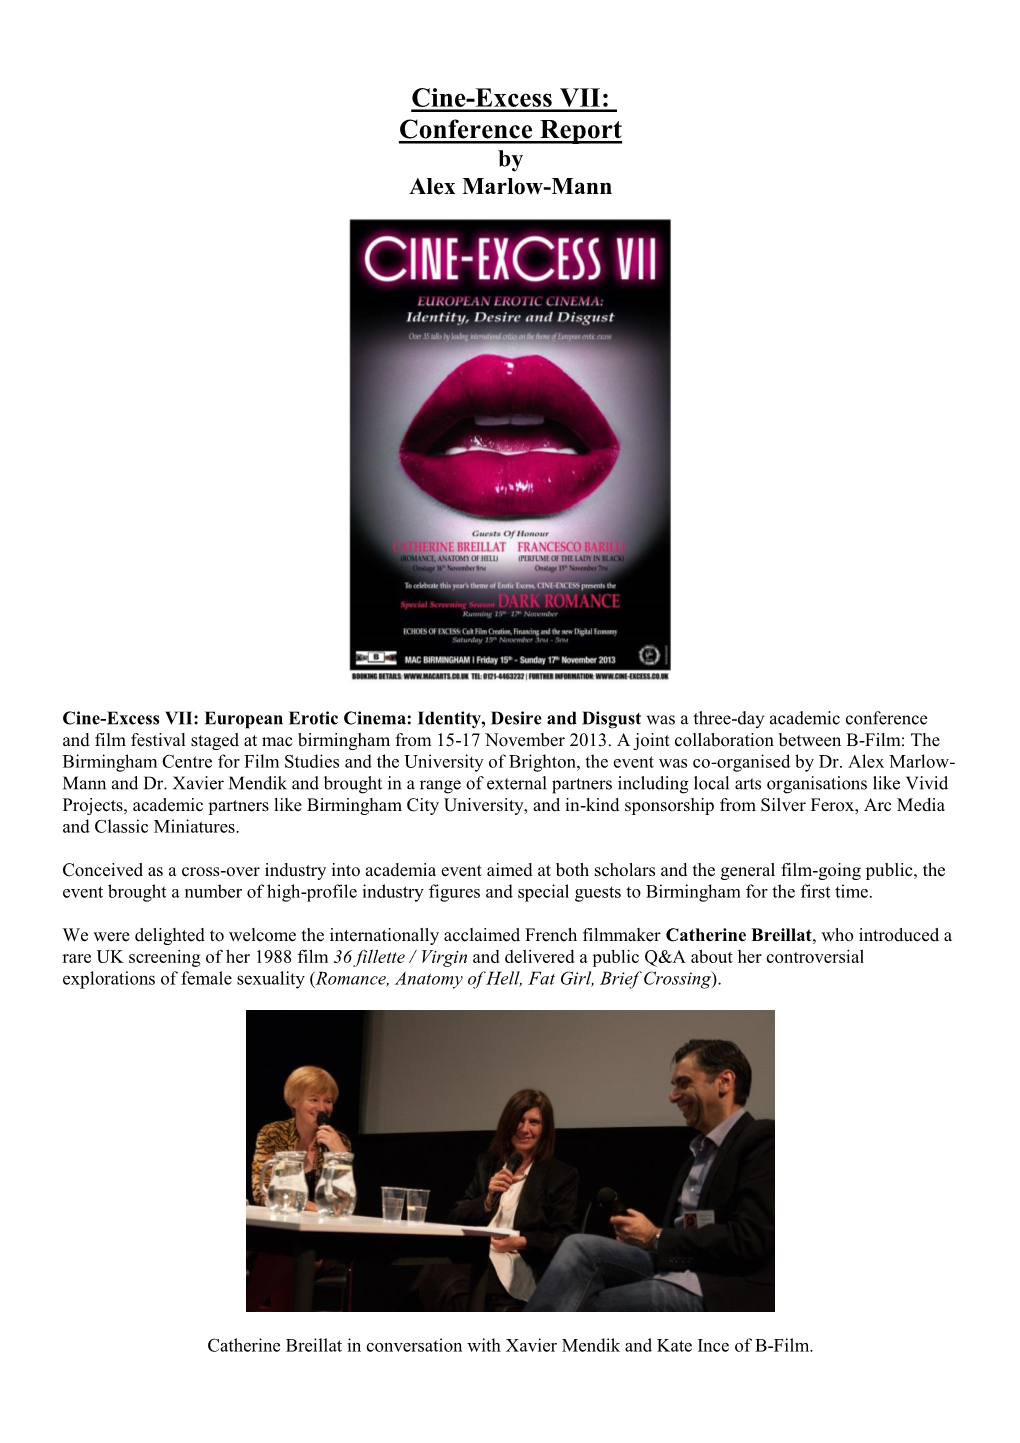 Cine-Excess VII: Conference Report by Alex Marlow-Mann